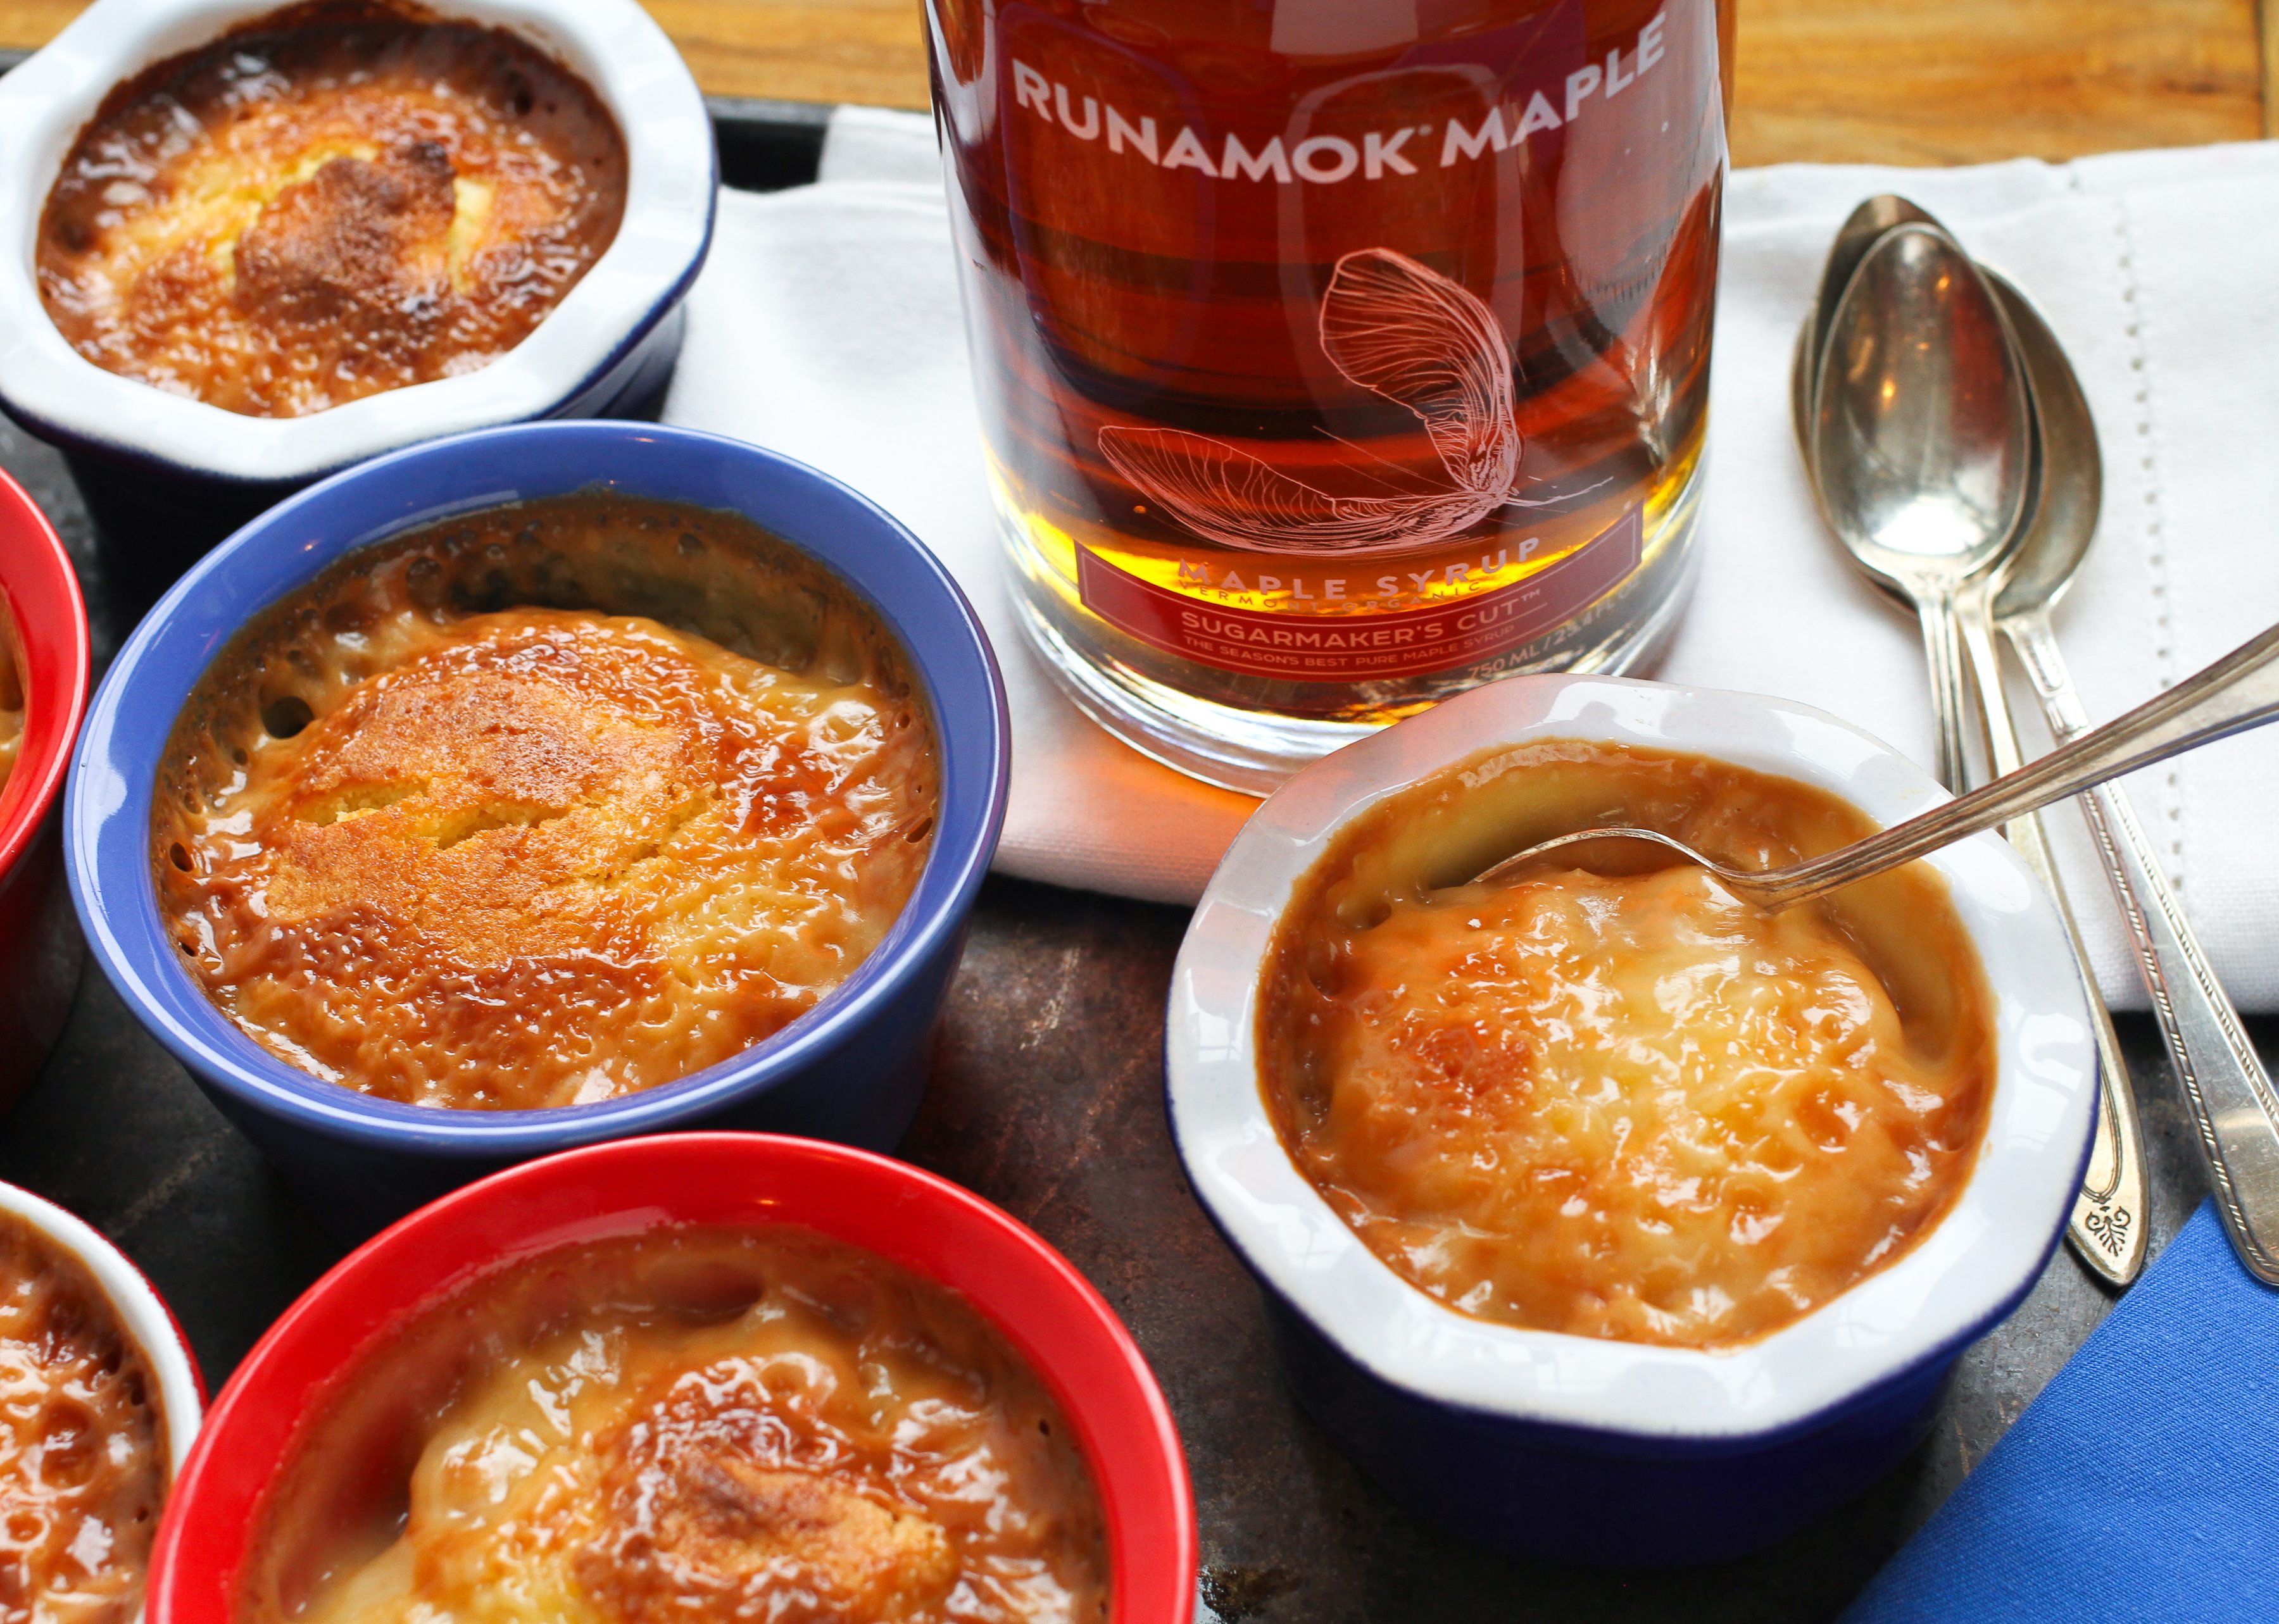 Pudding chomeur with Runamok sugarmaker's cut maple syrup